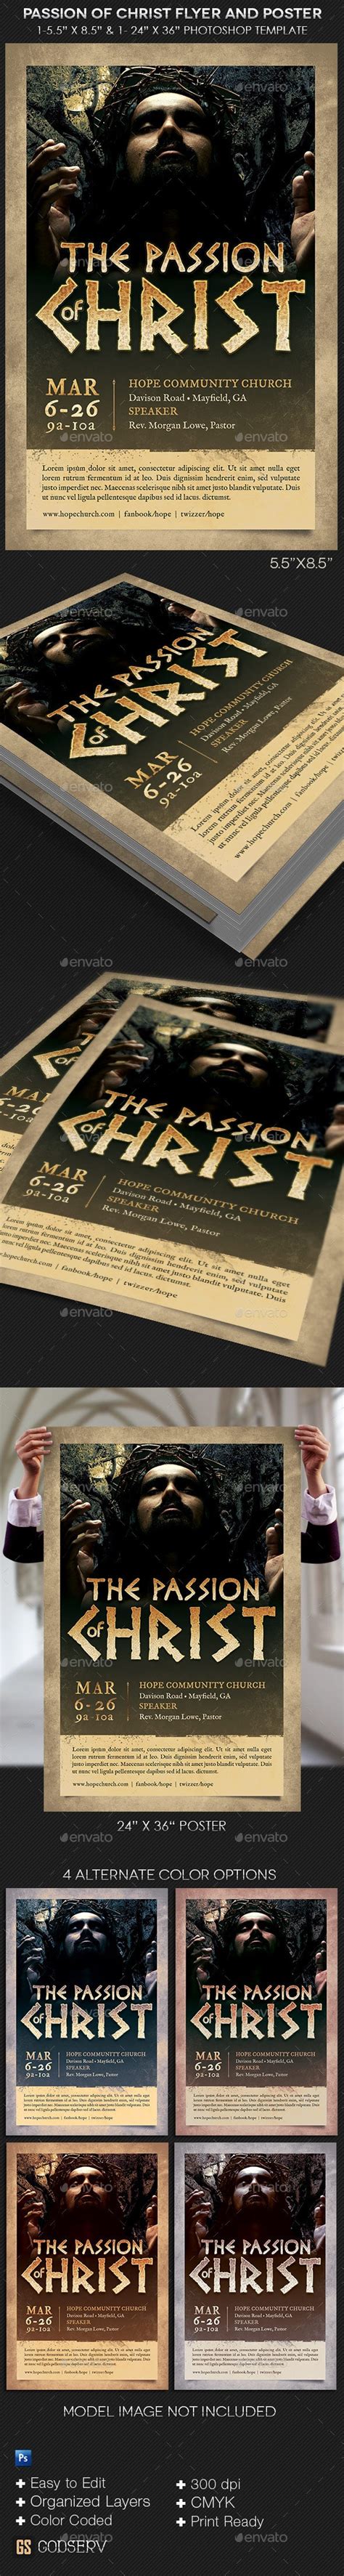 Christ Passion Flyer Poster Template By Godserv Graphicriver